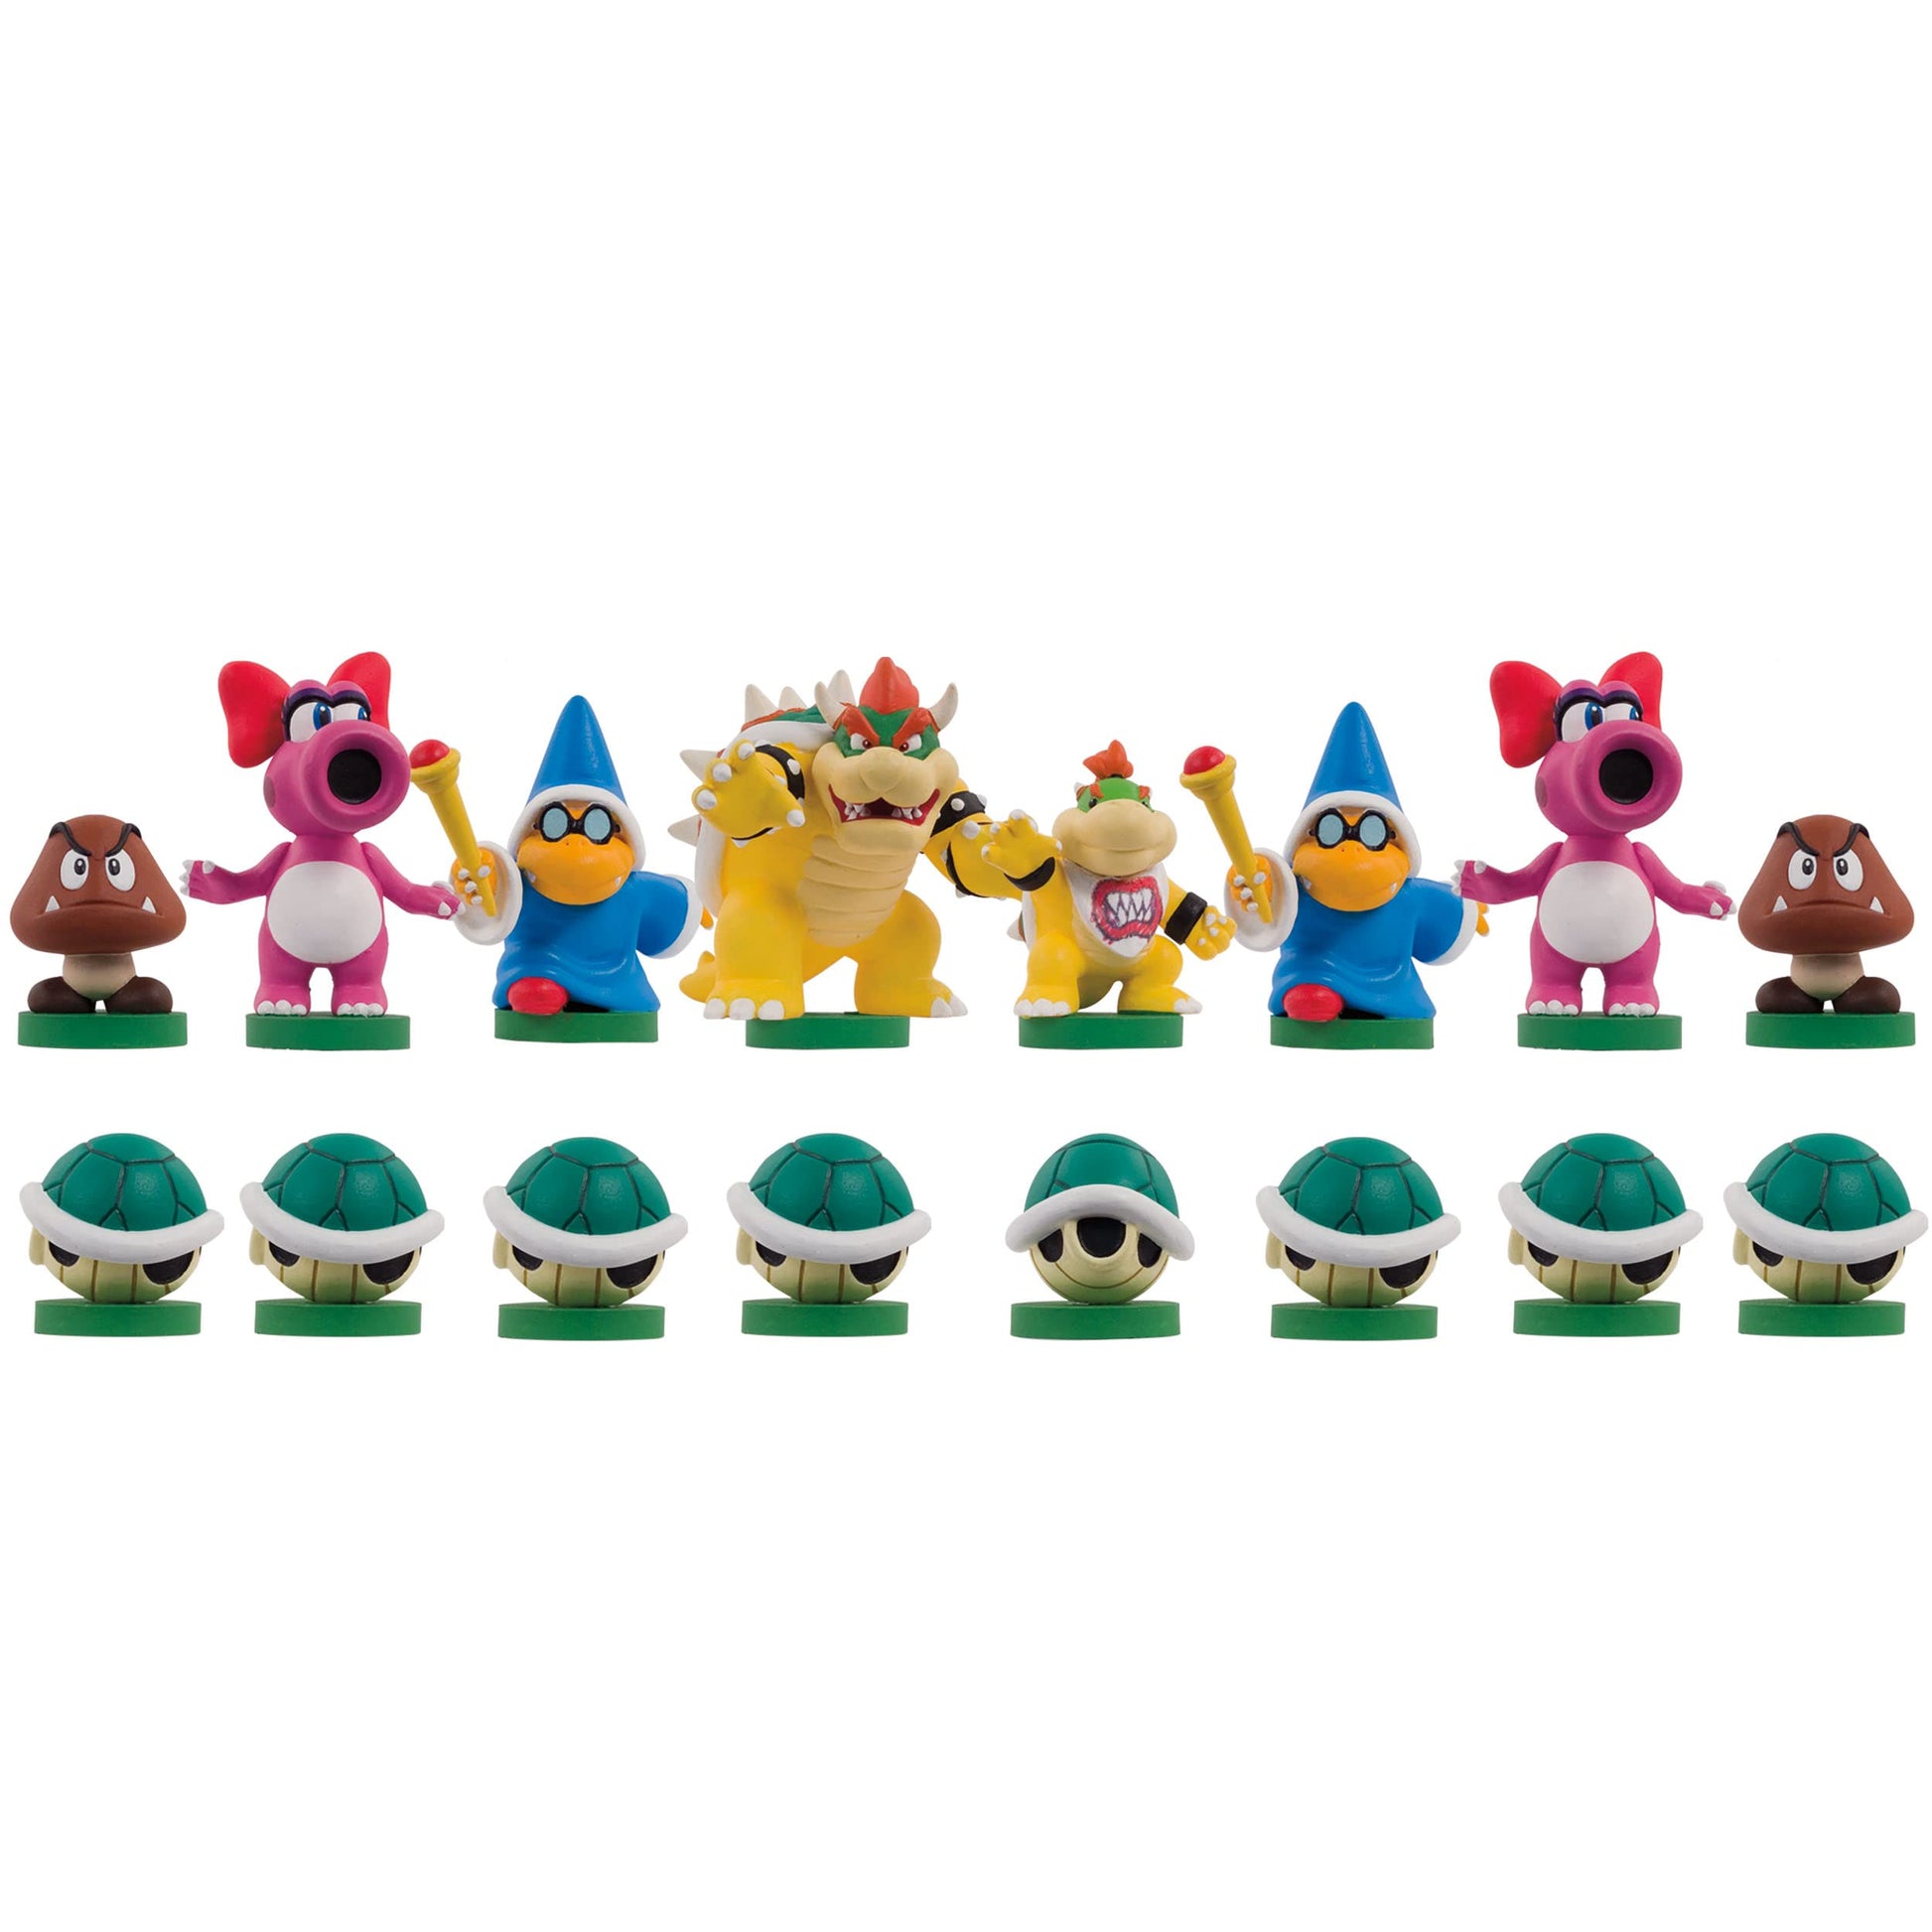 Super Mario Chess Set | 32 Custom Sculpt Chess Pieces Including Iconic Characters - Mario, Luigi, Peach, Toad, Bowser | Super Mario Themed Chess Game - amzGamess